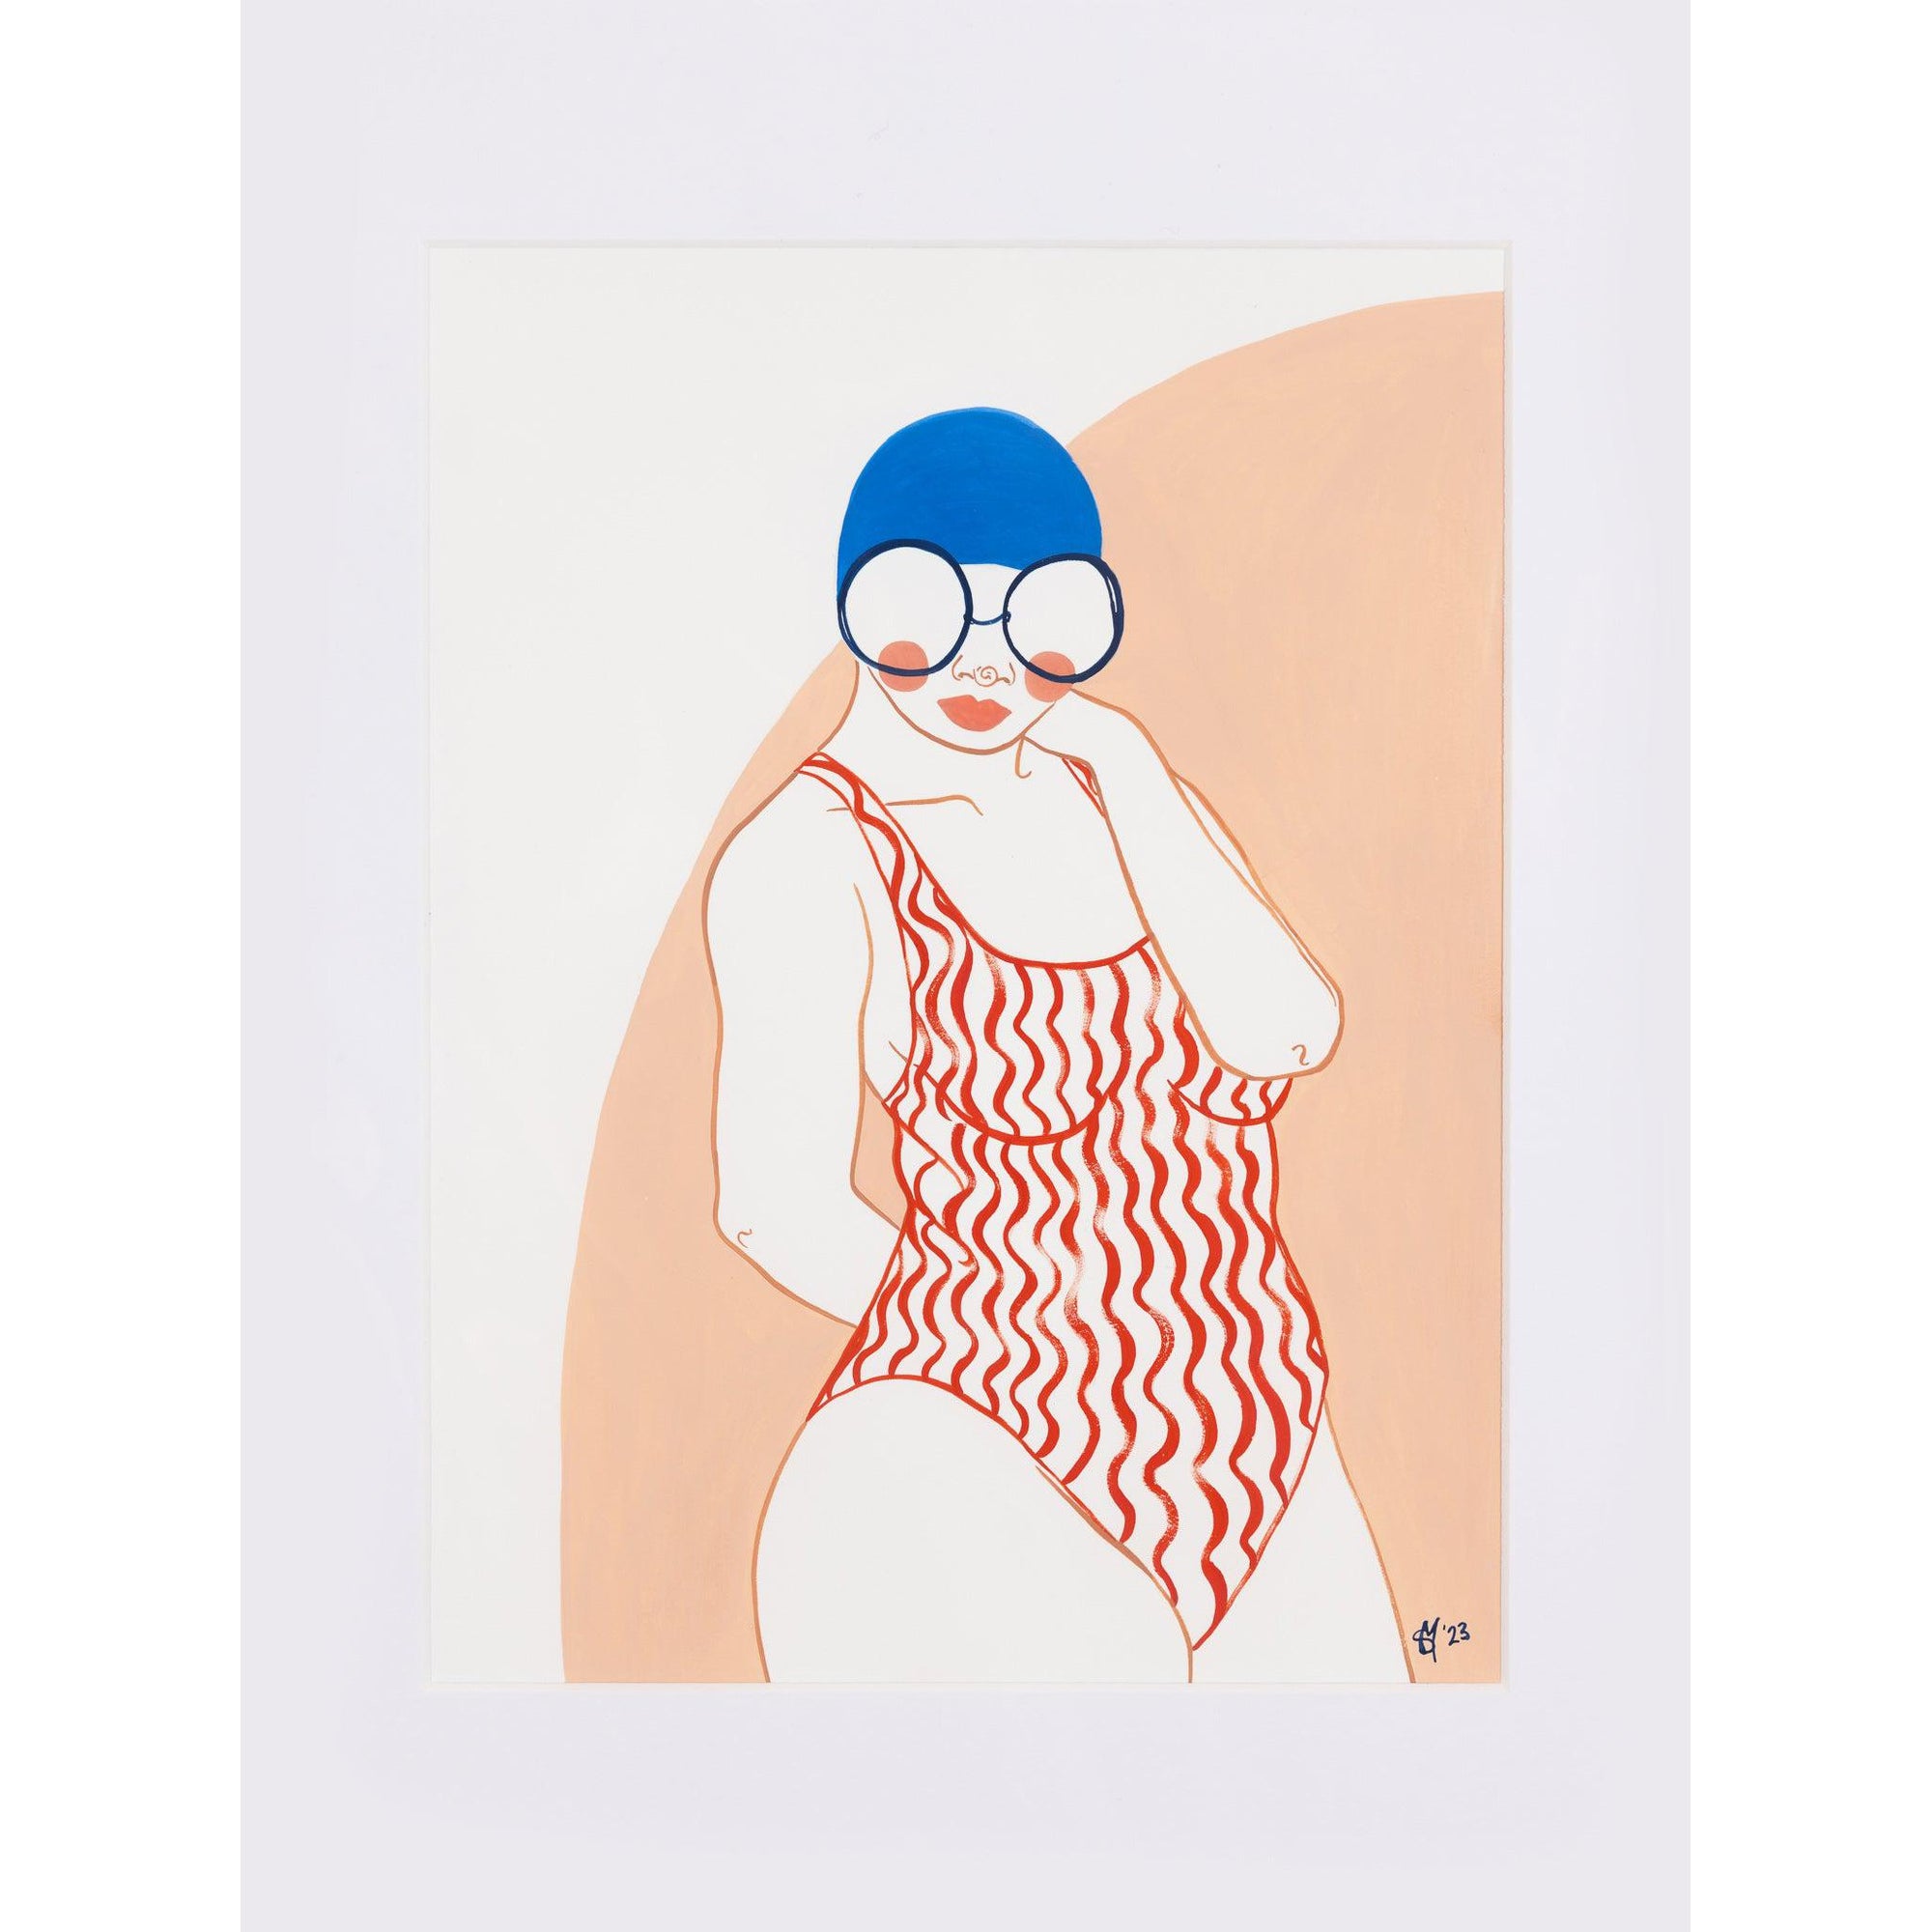 Pontoon Swimmer No2 gouache original by Sophie Moore, available at Padstow Gallery, Cornwall